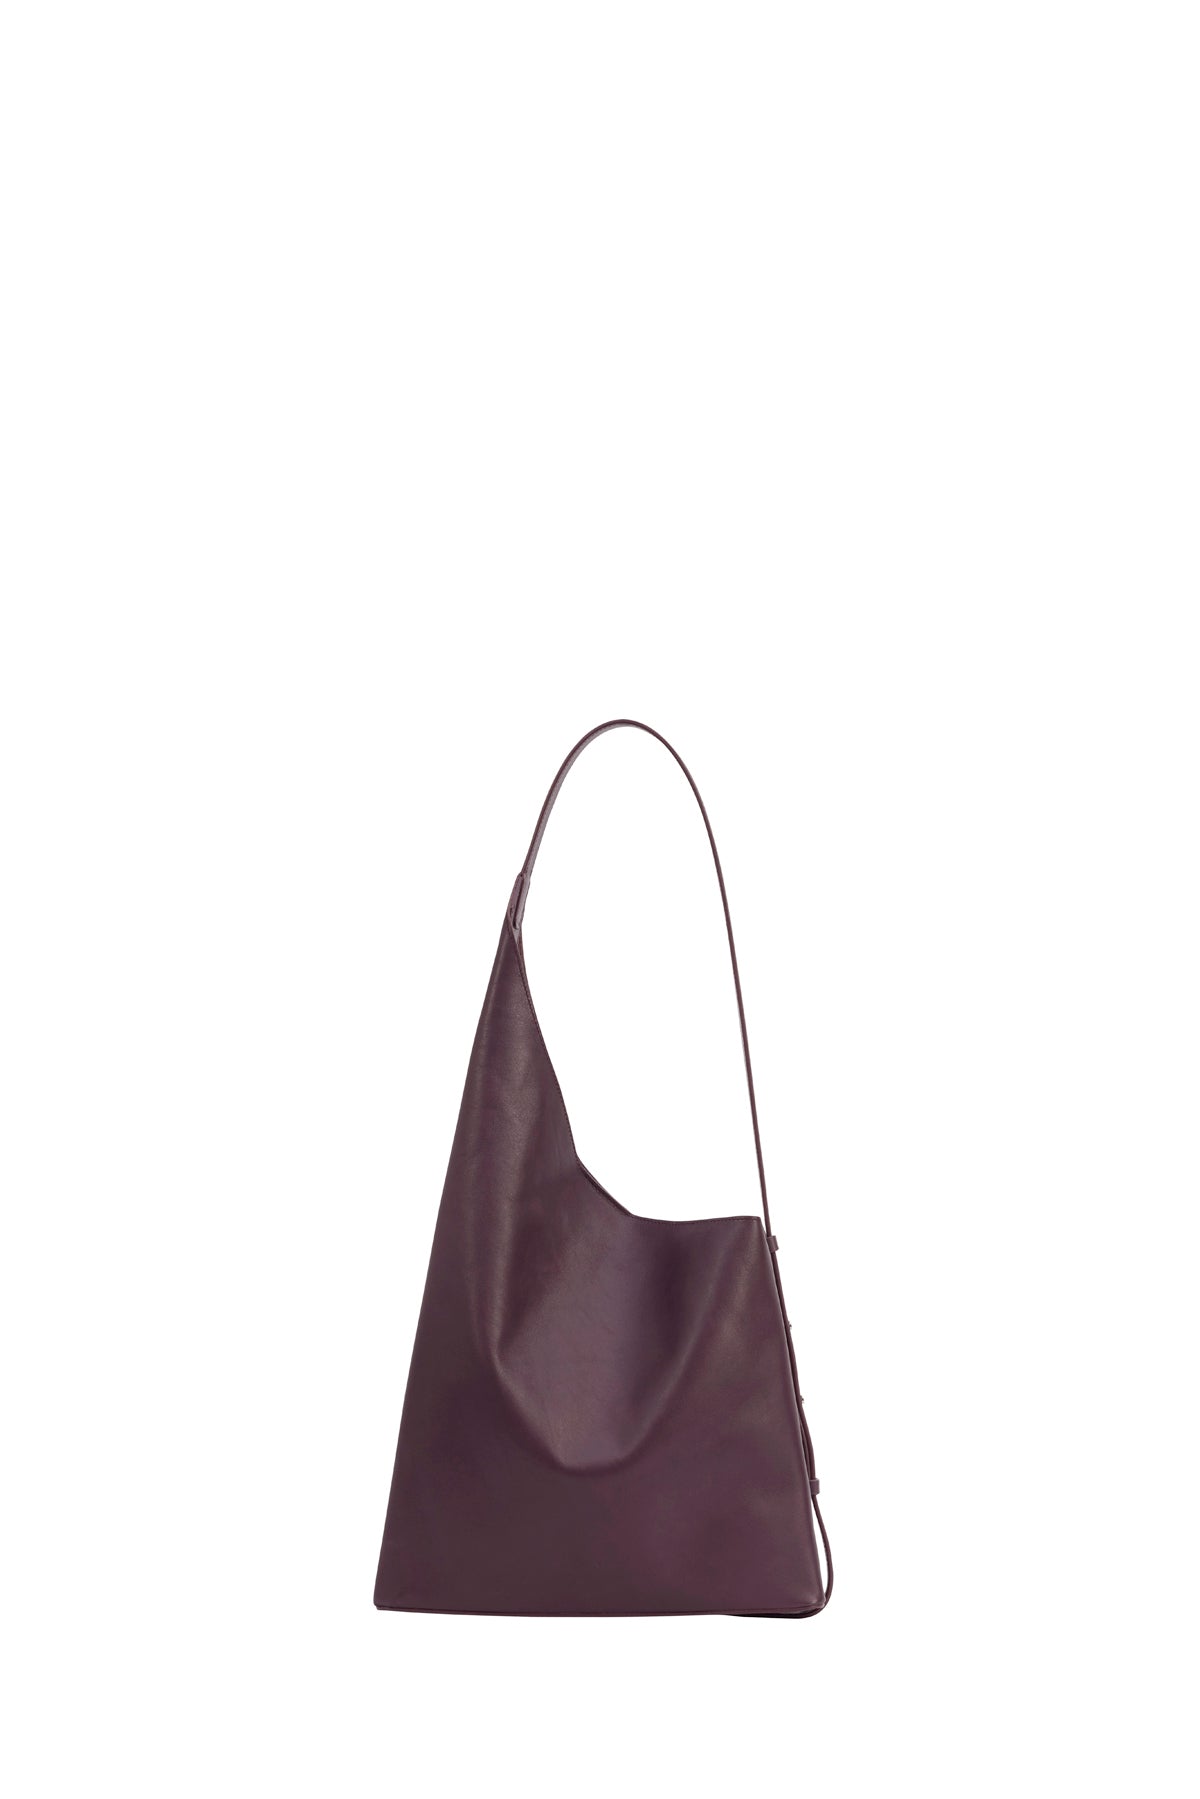 Aesther Ekme - The #Sac, the seasonless and ultralight, carry-all #totebag  is available in the new Fallen Rock color. Pre-order it now on  aestherekme.com !